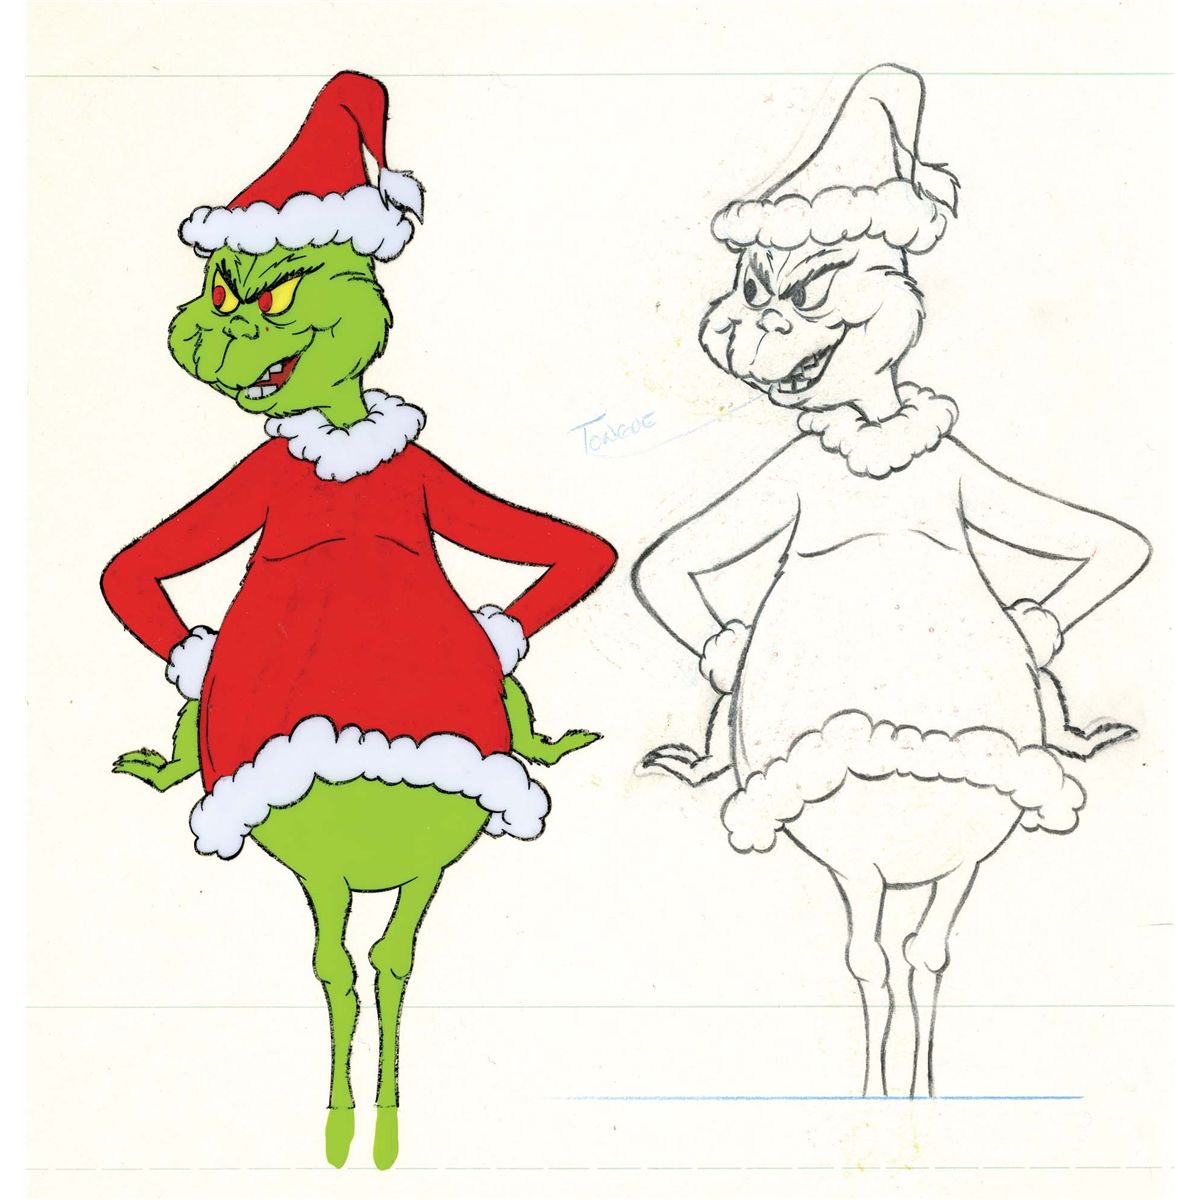 Original production cel and matching drawing from how the grinch clipart